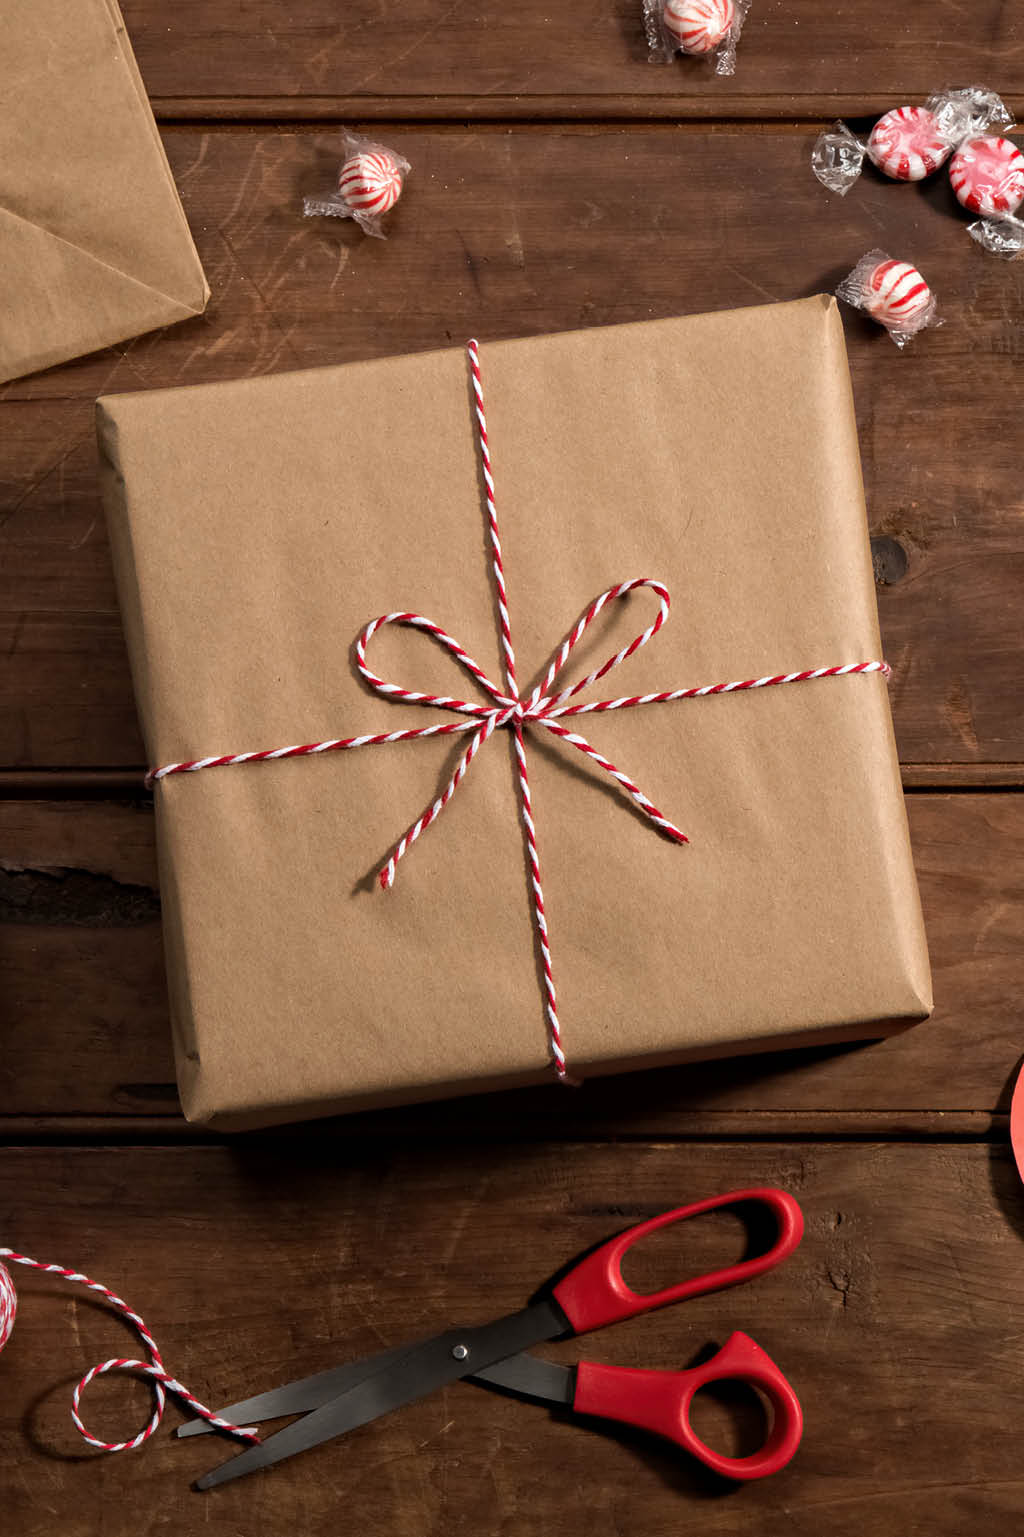 https://americanlifestylemag.com/wp-content/uploads/2018/08/giftwrapping-intext-1.jpg